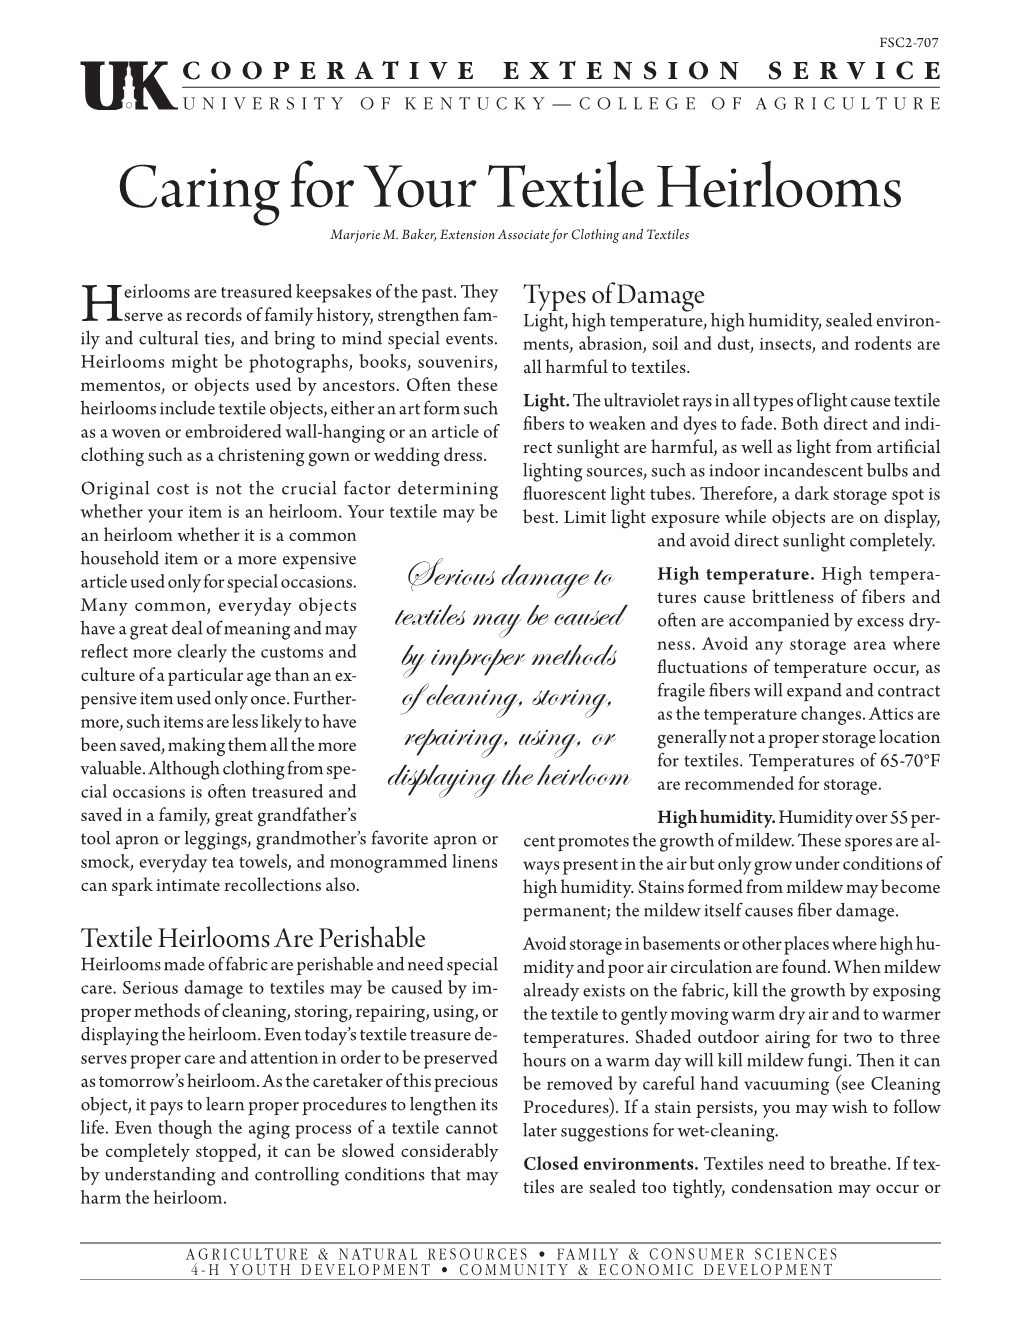 Caring for Your Textile Heirlooms Marjorie M